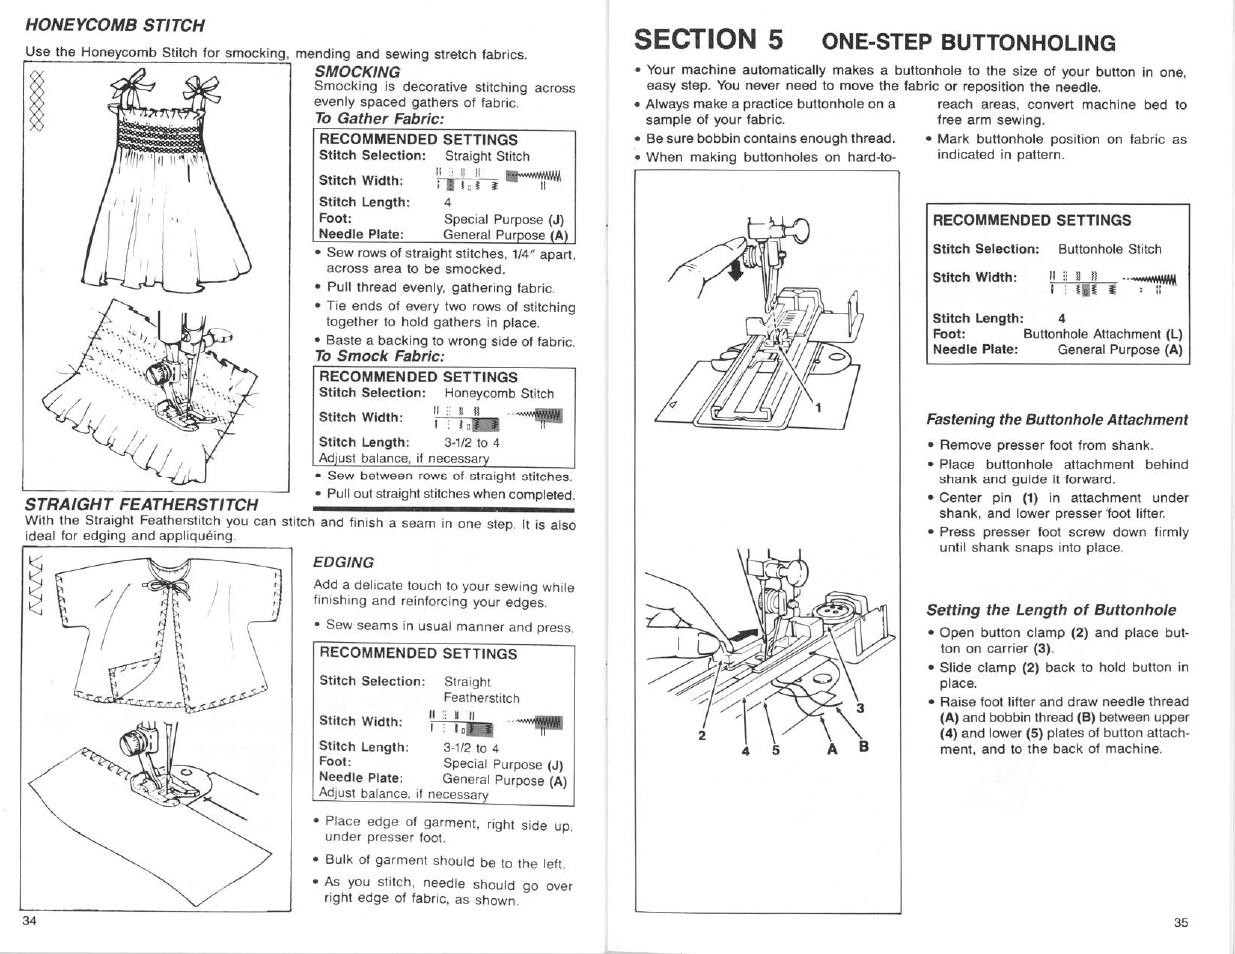 Honeycomb stitch, Smocking, Straight featherstitch | Edging, Fastening the buttonhole attachment, Setting the length of buttonhole, Fh4i -if, One-step buttonholing | SINGER 9124 User Manual | Page 19 / 25